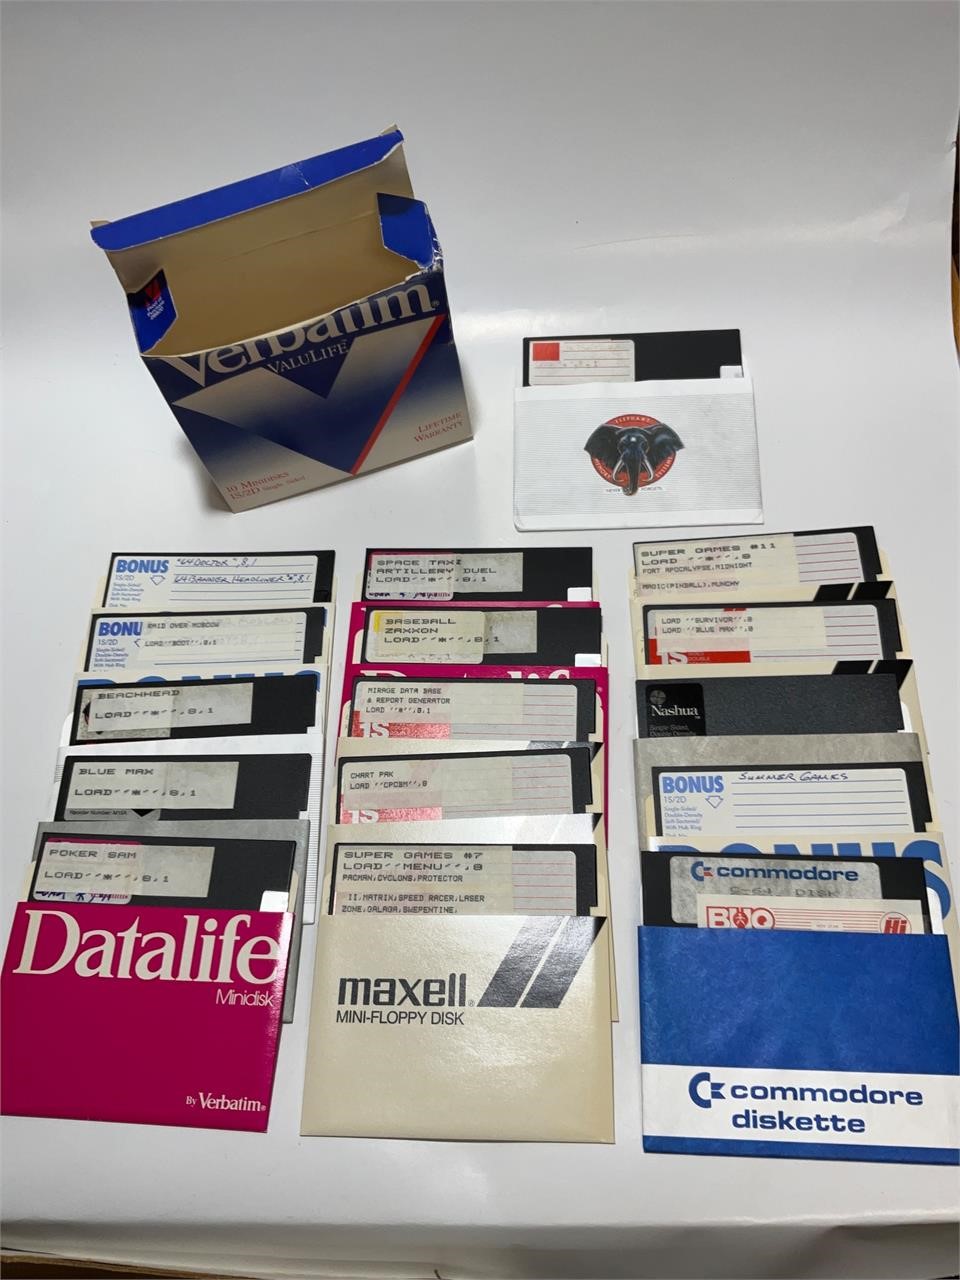 Box of Commodore 64 games, all floppy disks